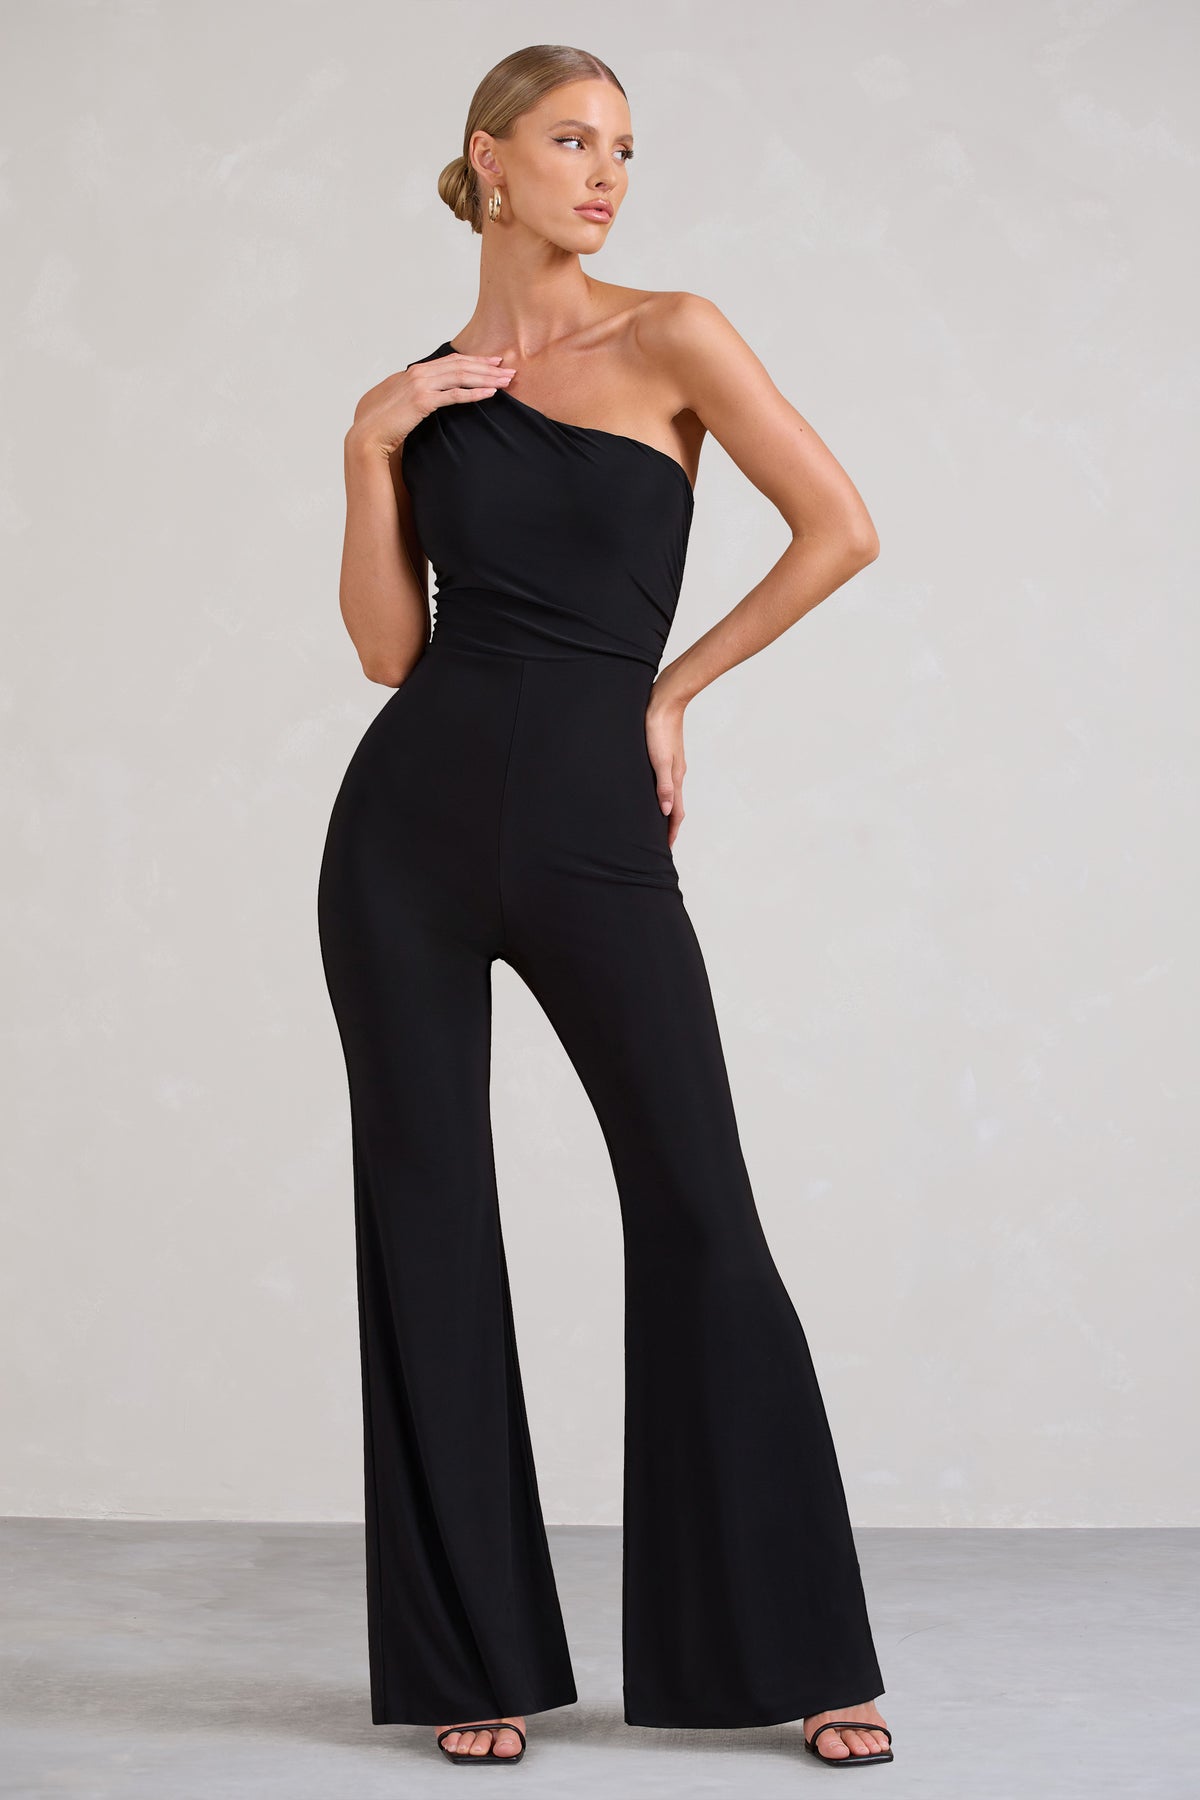 Sexy One Shoulder Rompers Womens Jumpsuit Sleeveless Belt Wide Leg Elegant  Lady New Size Bodycon Jumpsuits White Black